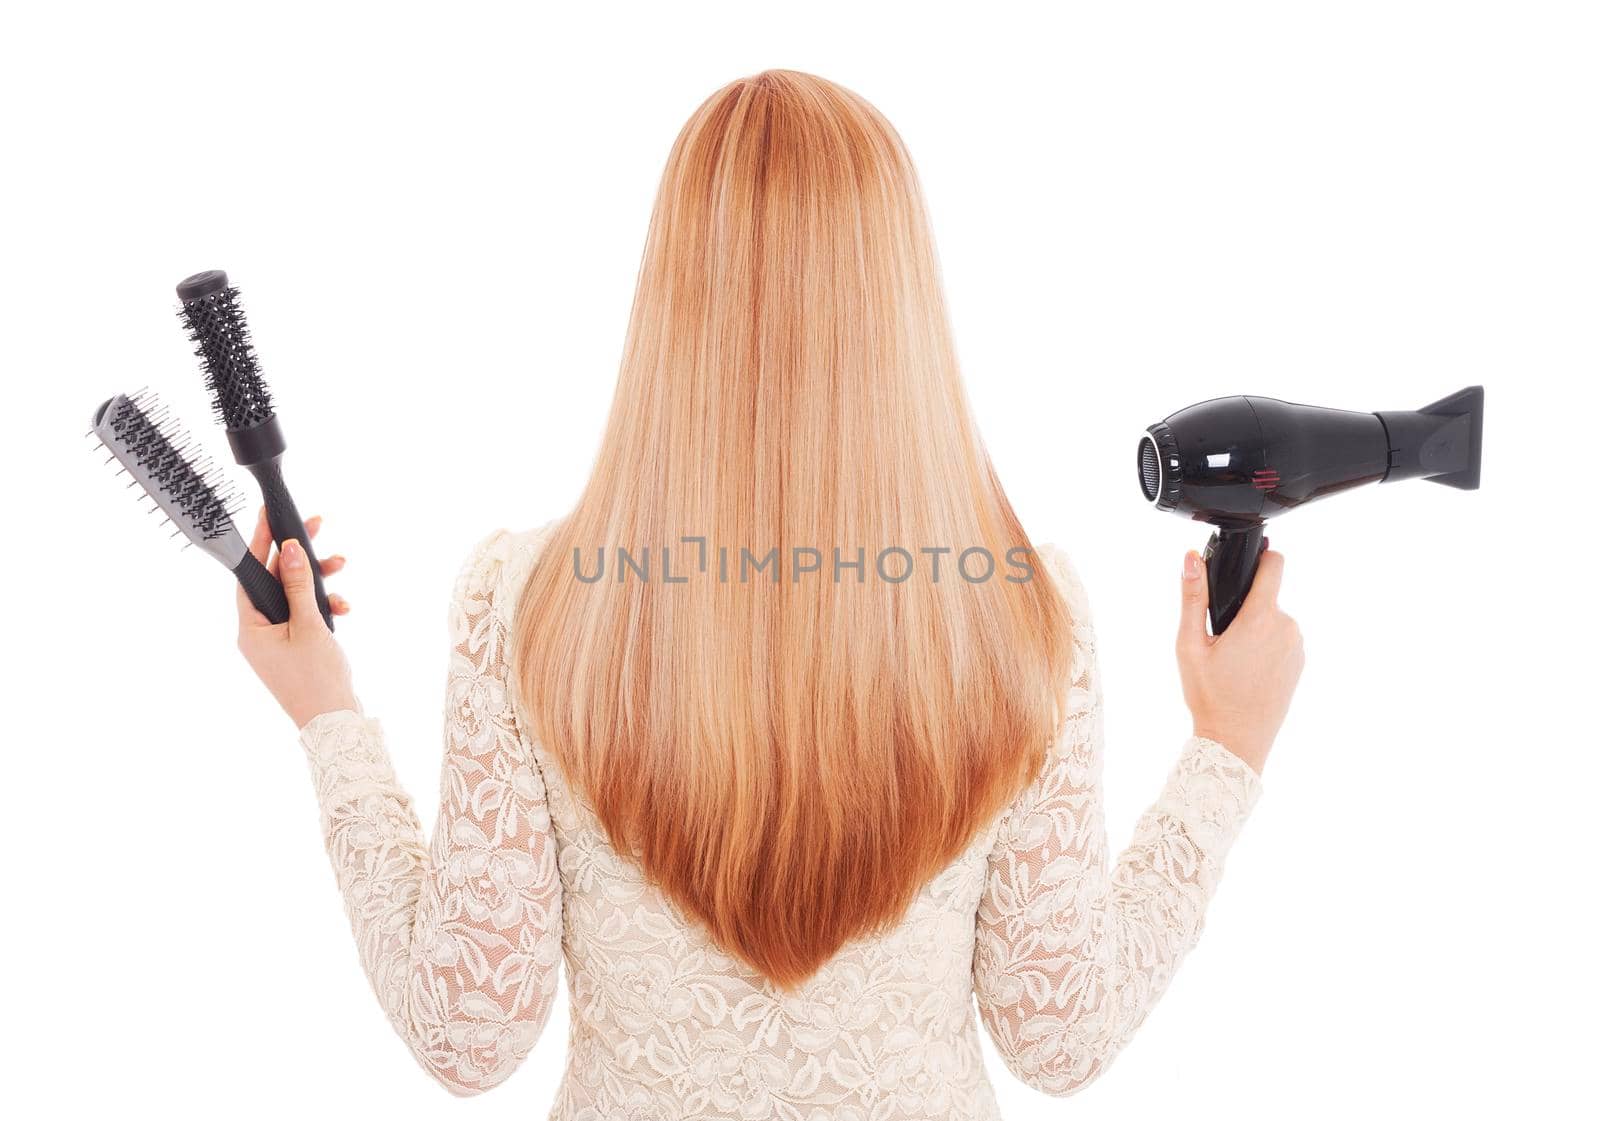 Redhead hair and hairdresser's tools - Stock Image by Jyliana